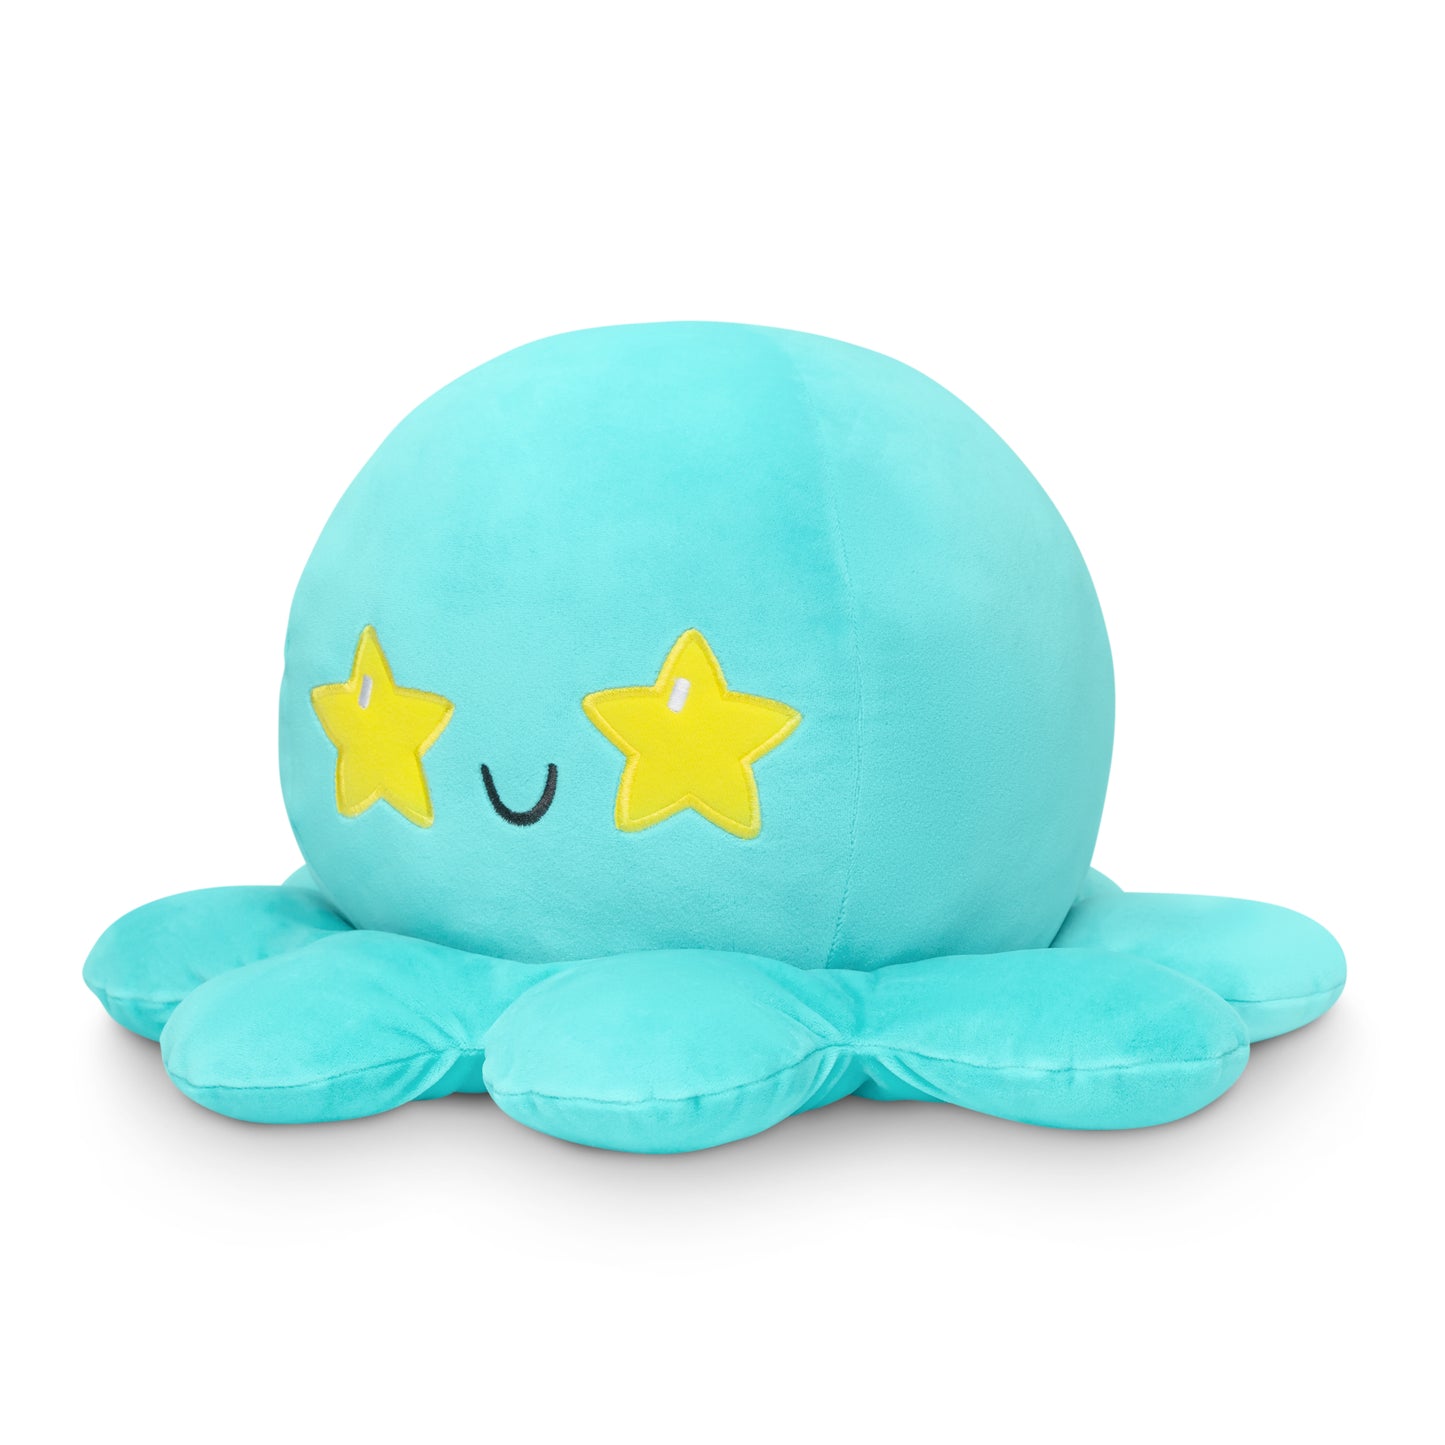 A TeeTurtle Giant Moody Octopus Plushie with stars on it, perfect for cuddling.